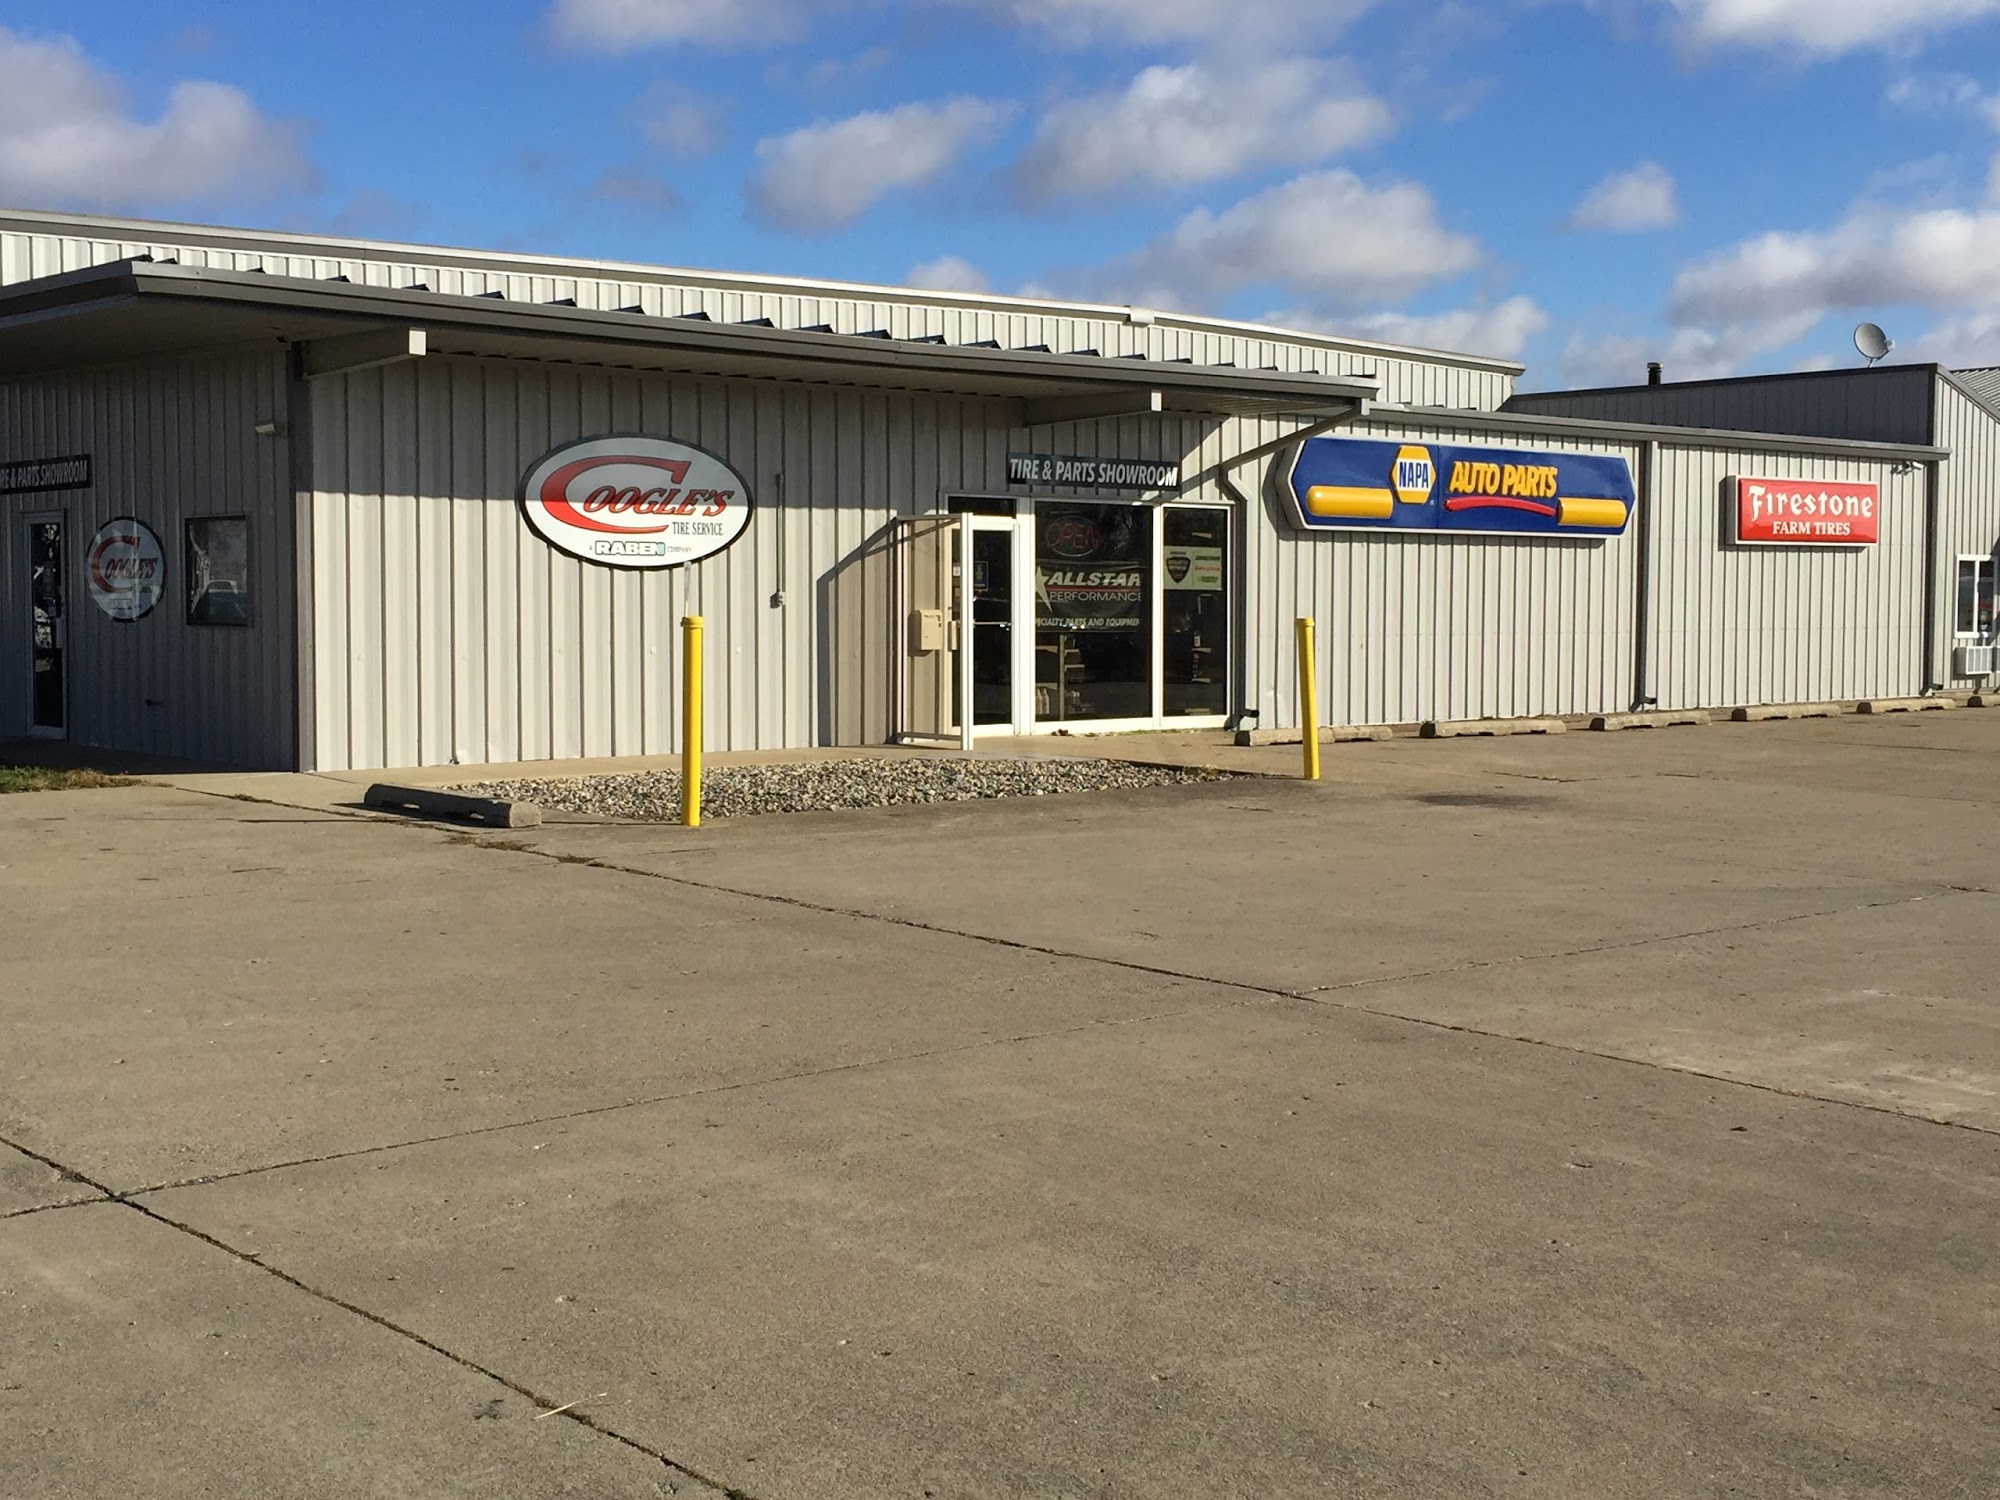 Goodyear Commercial Tire & Service Center